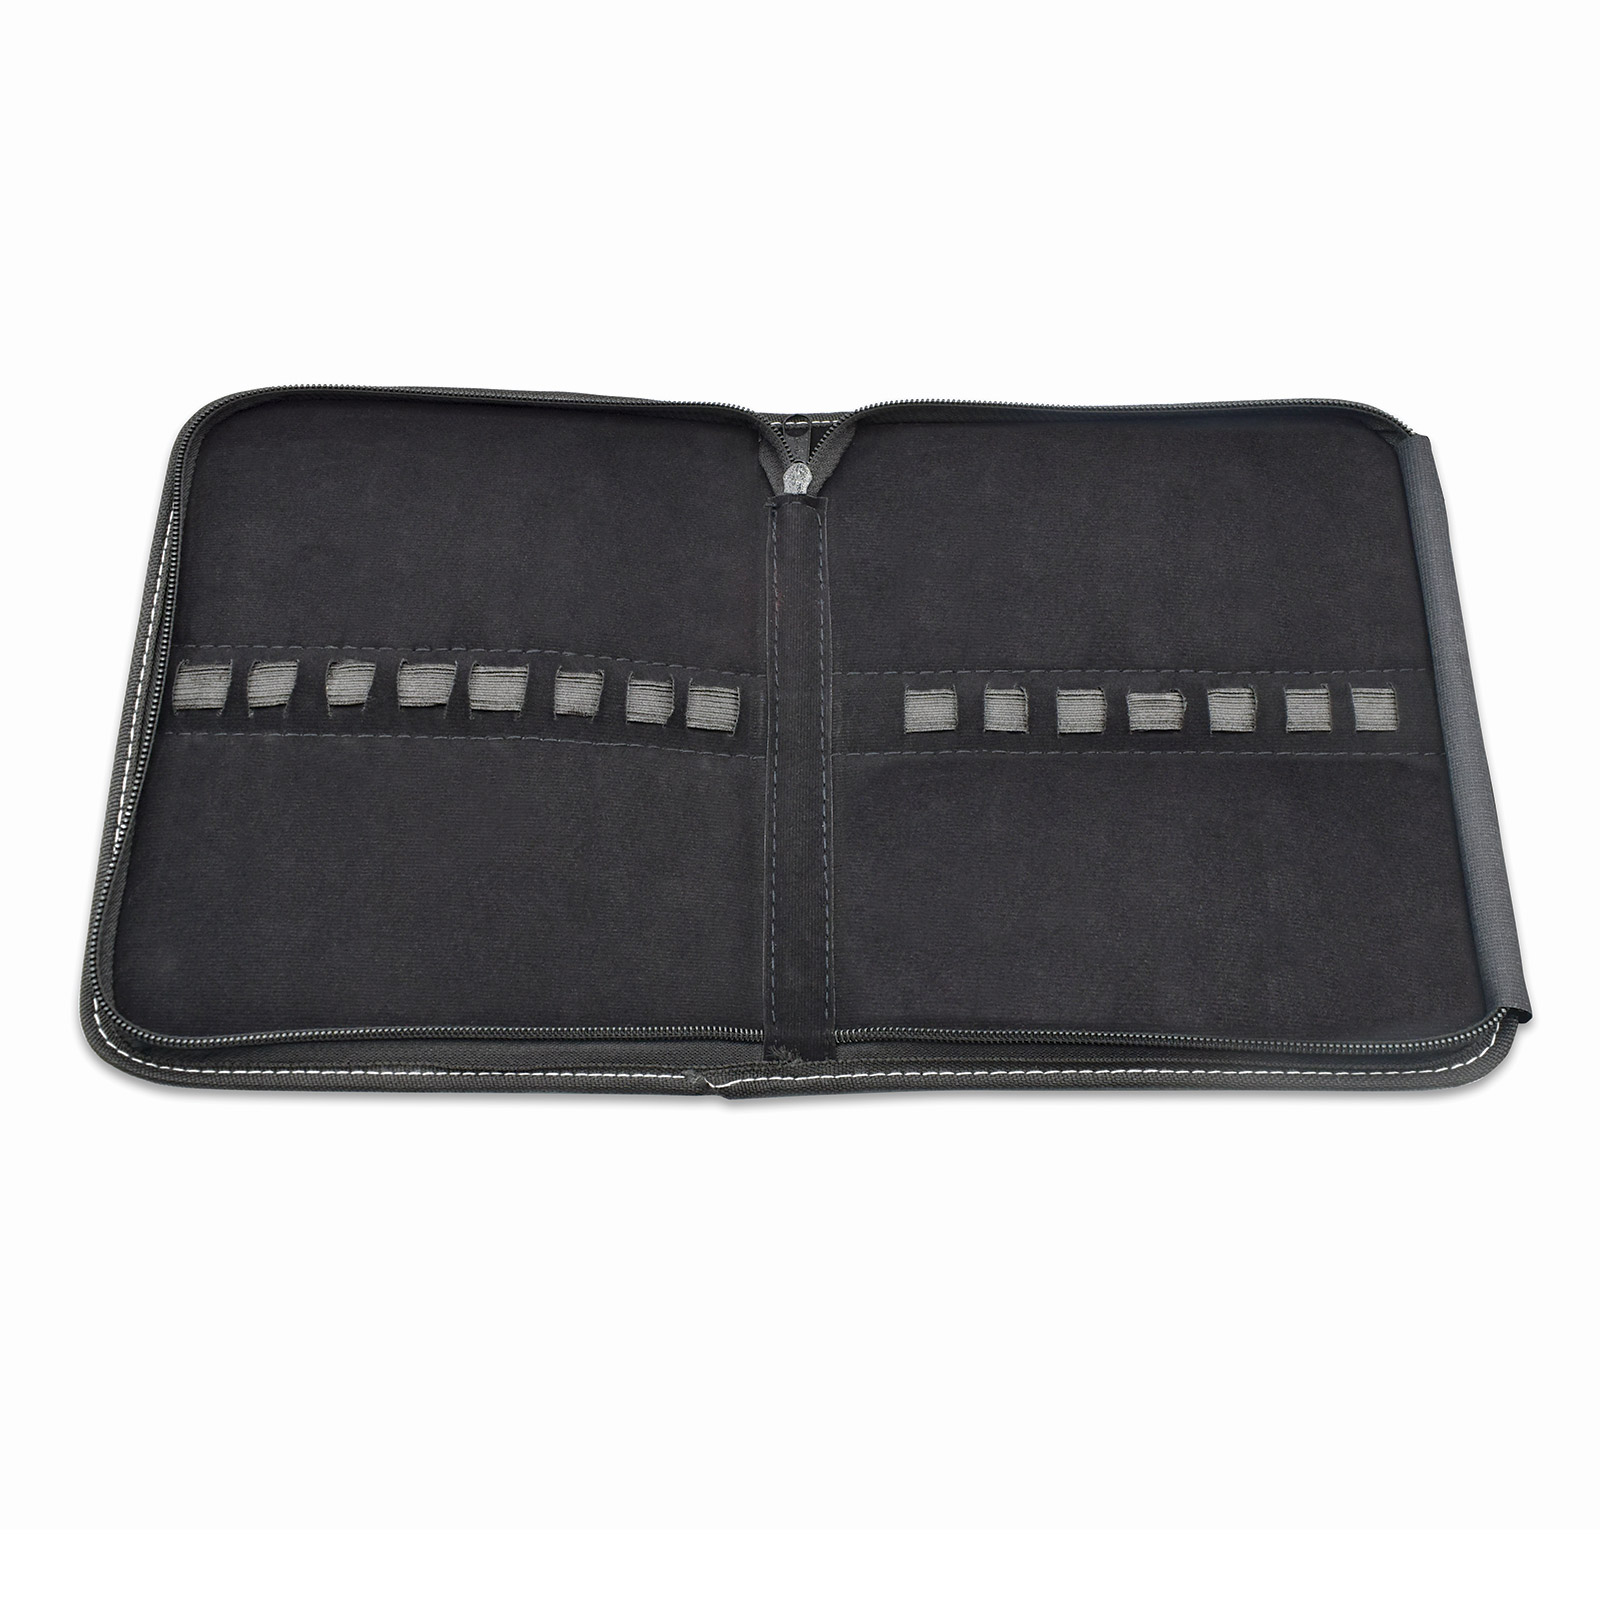 Specialty Tool Protective case